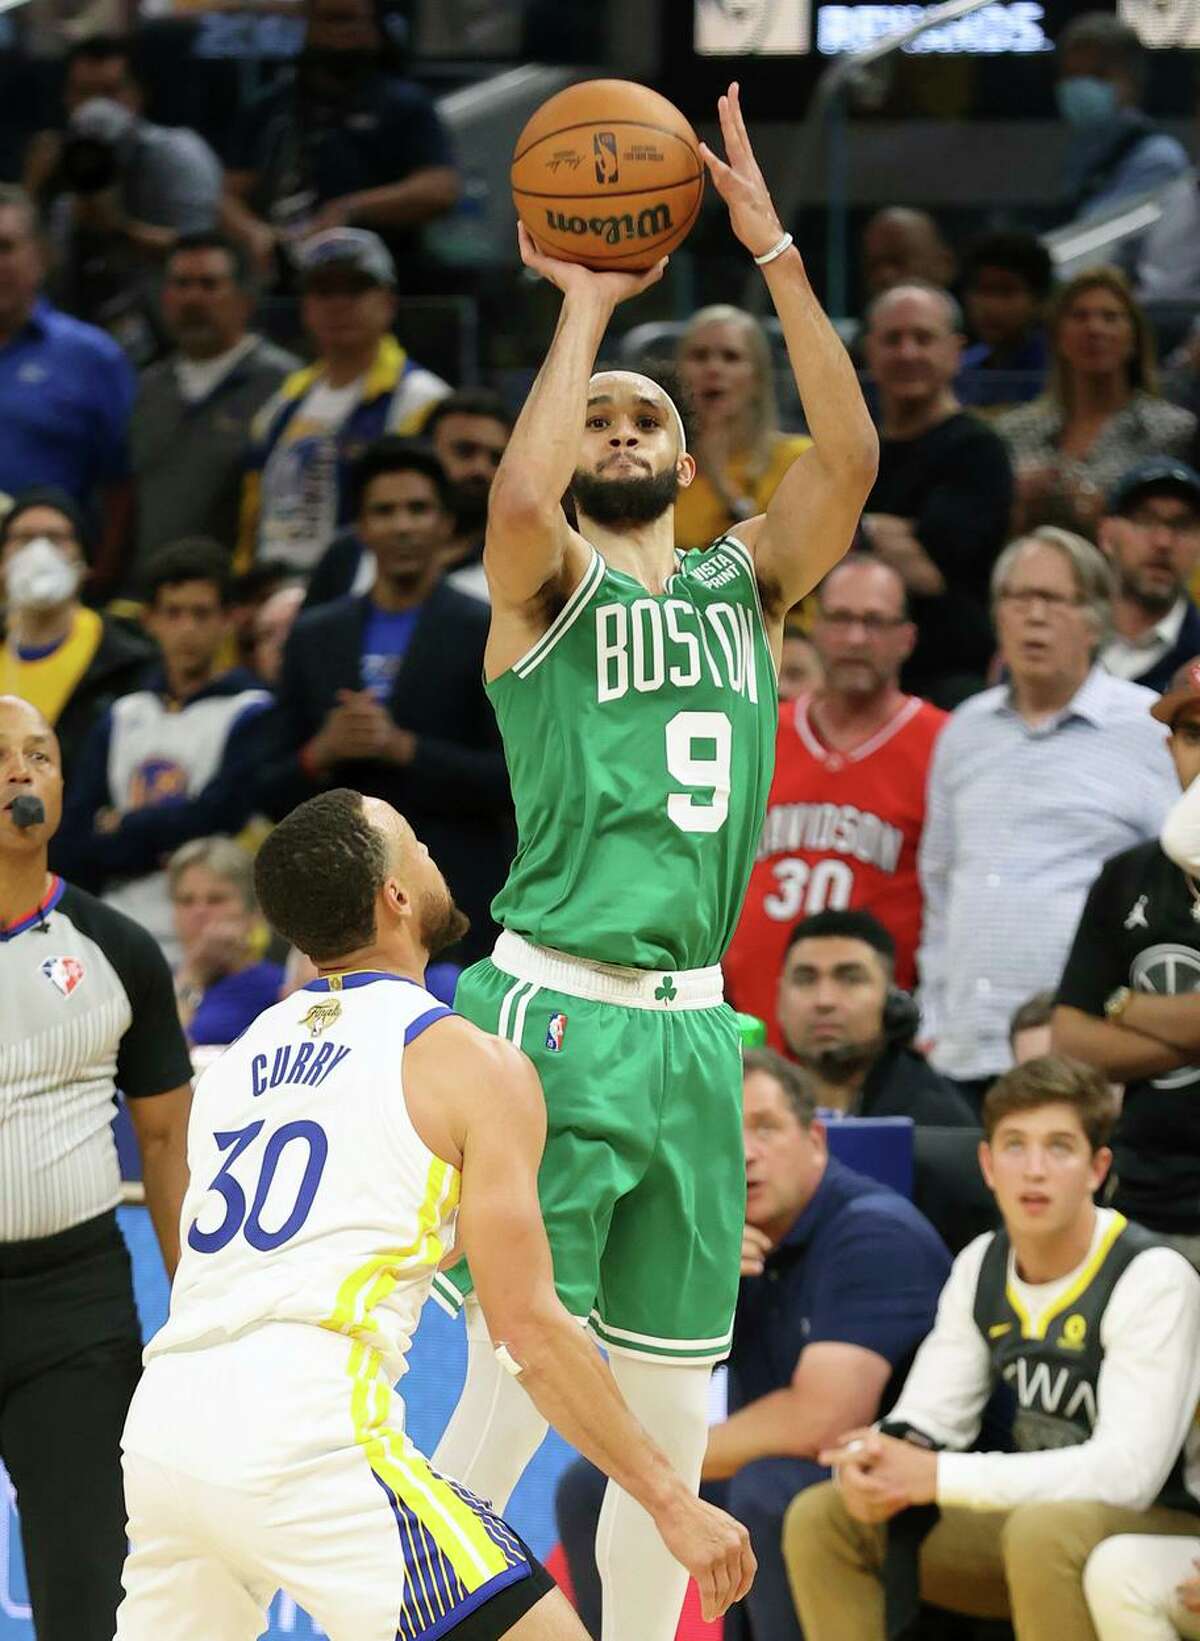 Boston Celtics’ Derrick White shoots a 3-pointer against Golden State Warriors’ Stephen Curry in 4th quarter during Celtics’ 120-108 win in Game 1 of NBA Finals at Chase Center in San Francisco, Calif., on Thursday, June 2, 2022.